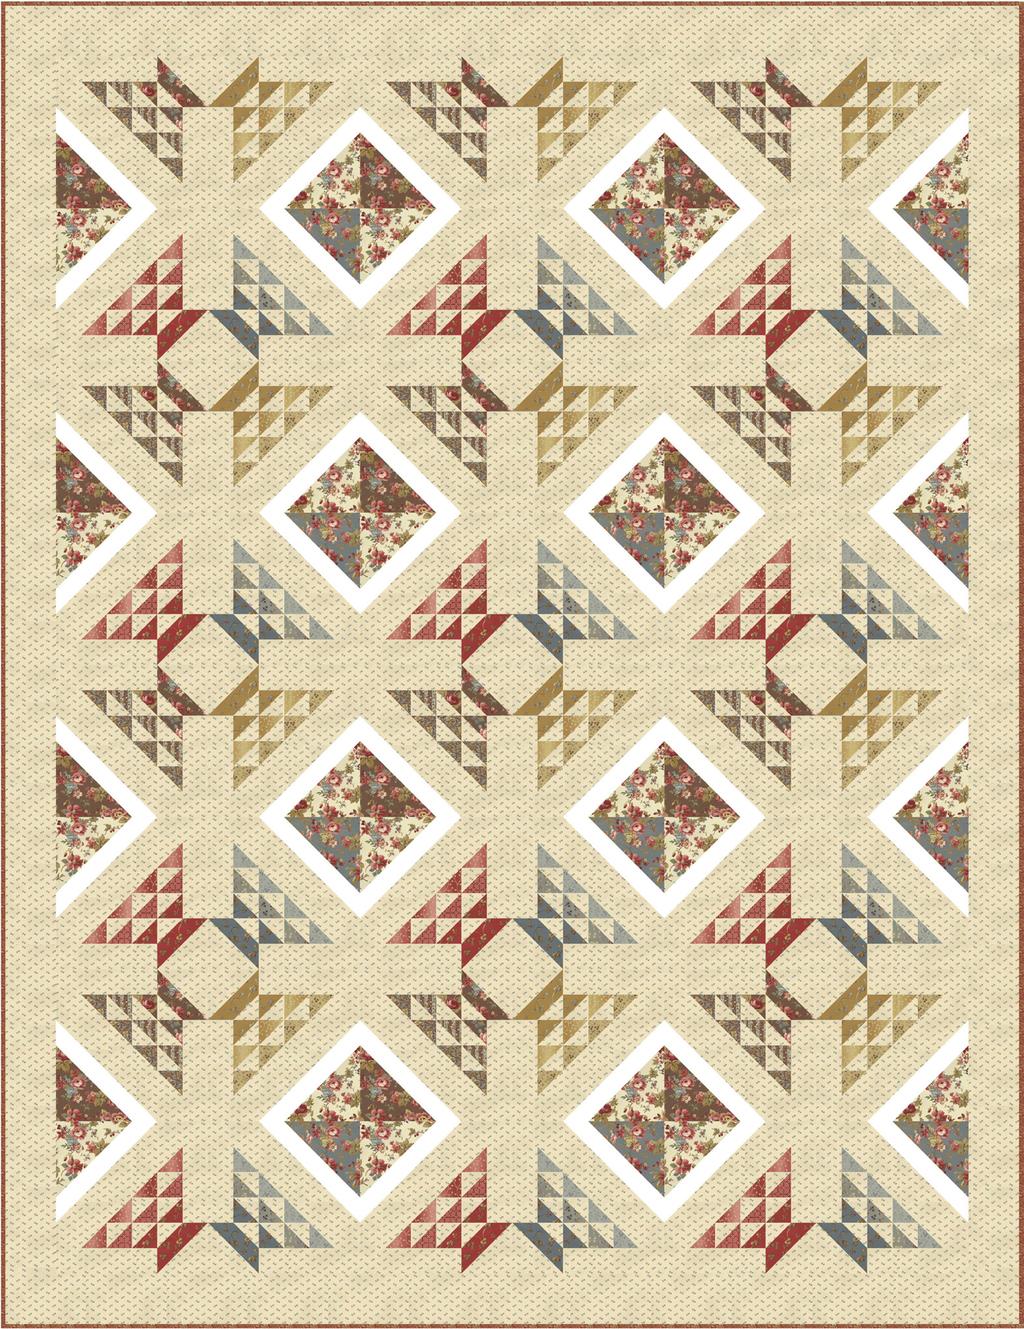 this is a digital representation of the quilt top, fabric may vary.